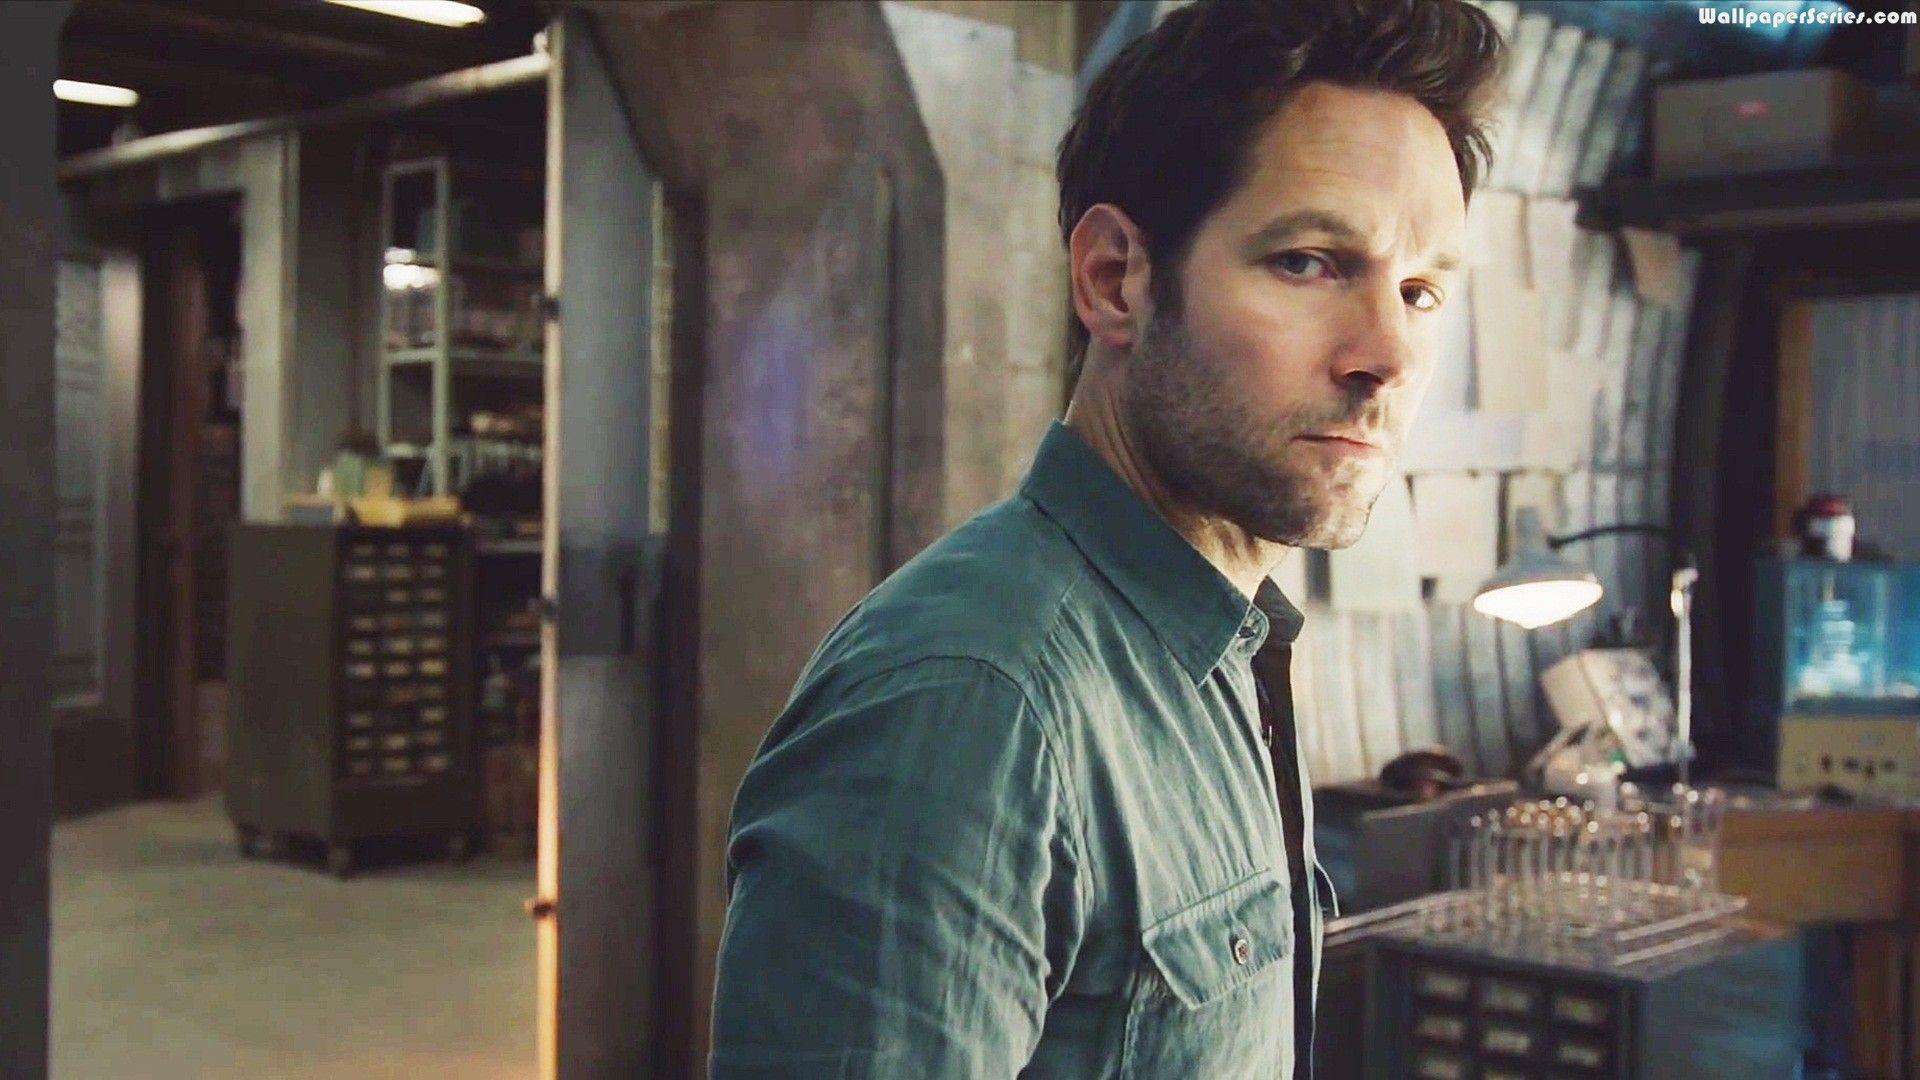 Paul Rudd Wallpaper High Resolution and Quality Download